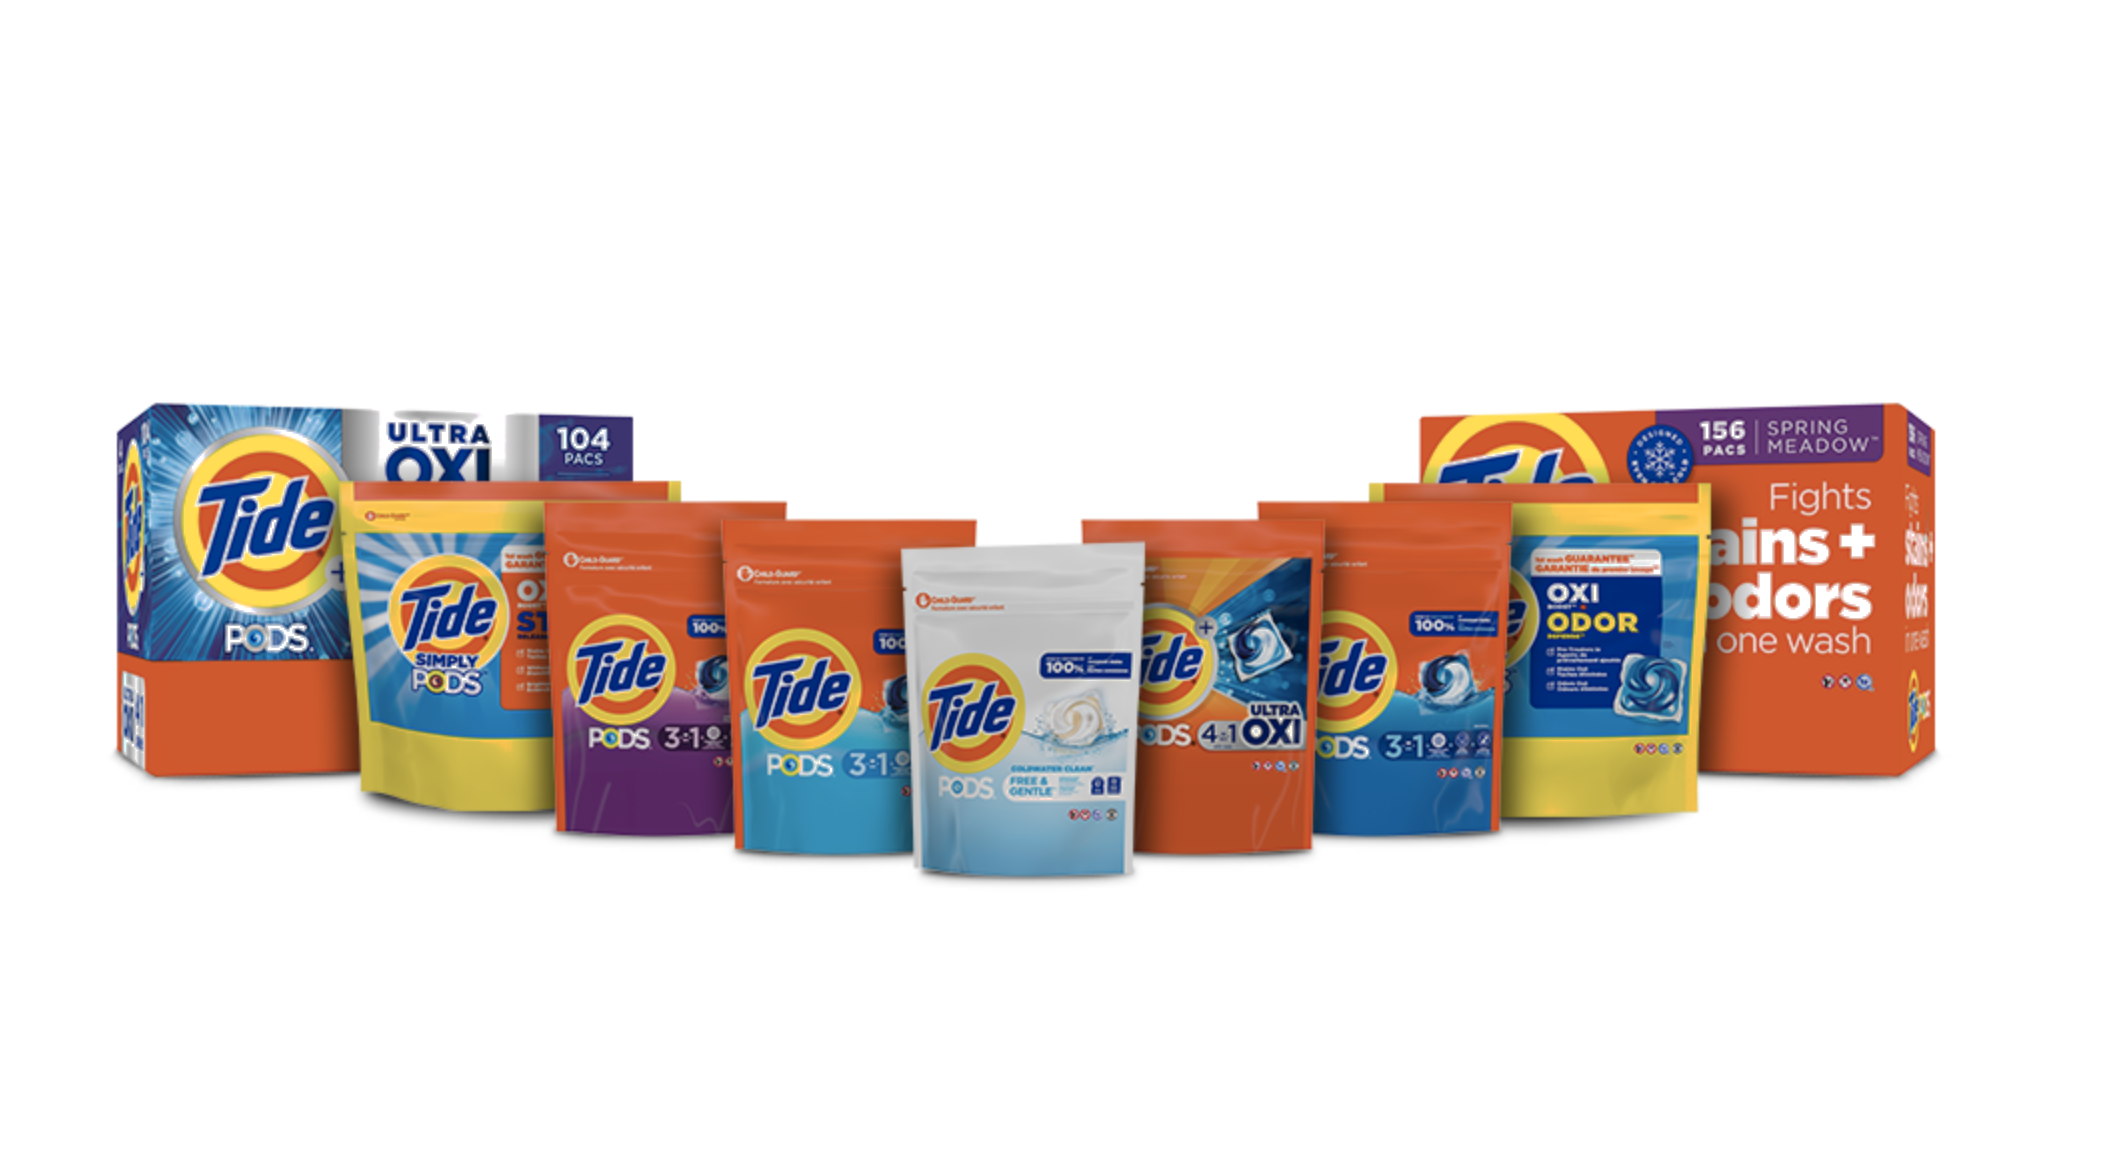 Proctor & Gamble Tide Pods Bags Packaging Recall/Refund:  Millions of Defective Bags Affected (Tide, Gain, Ace and Ariel) $50